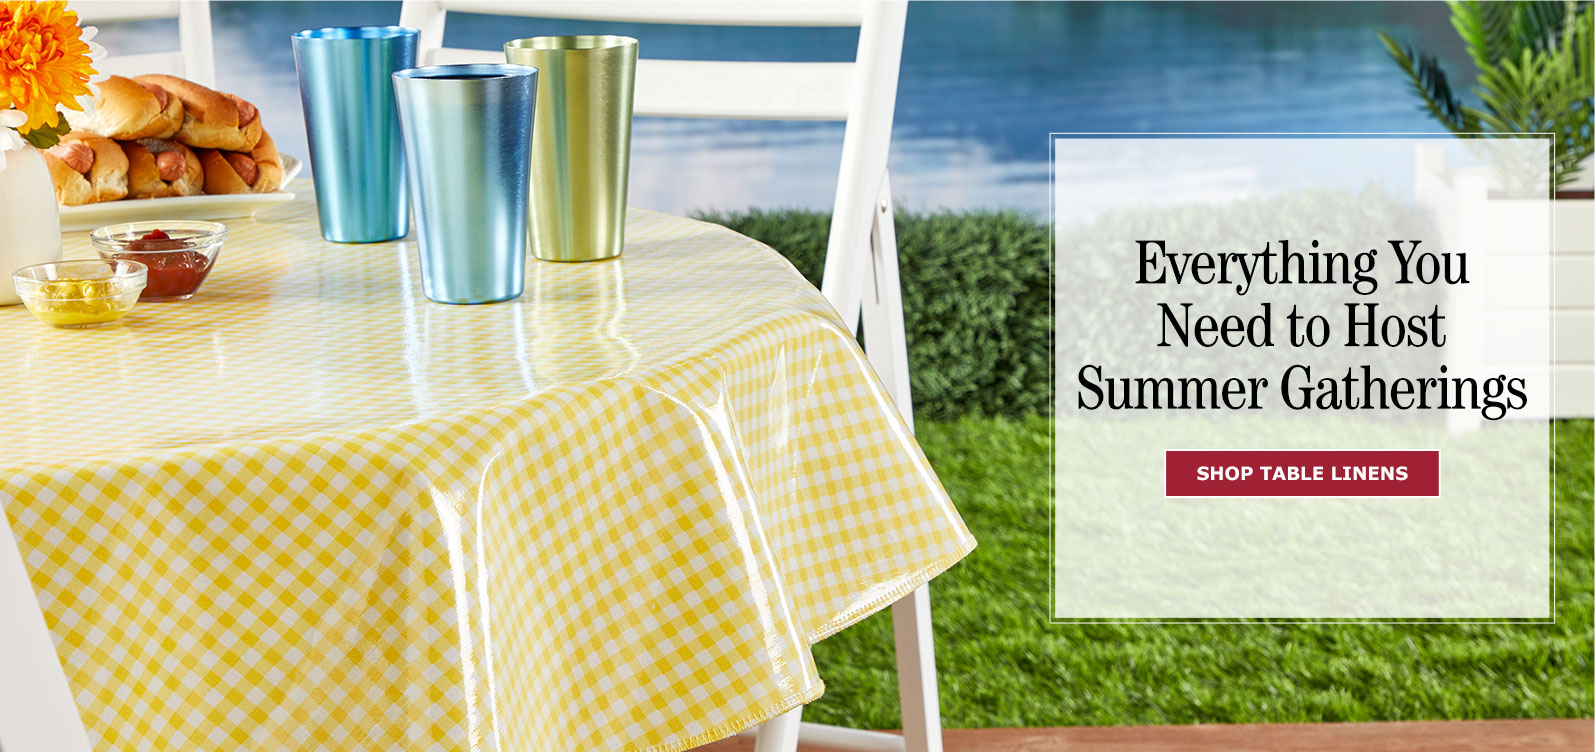 Everything You Need to Host Summer Gatherings. Shop Table Linens